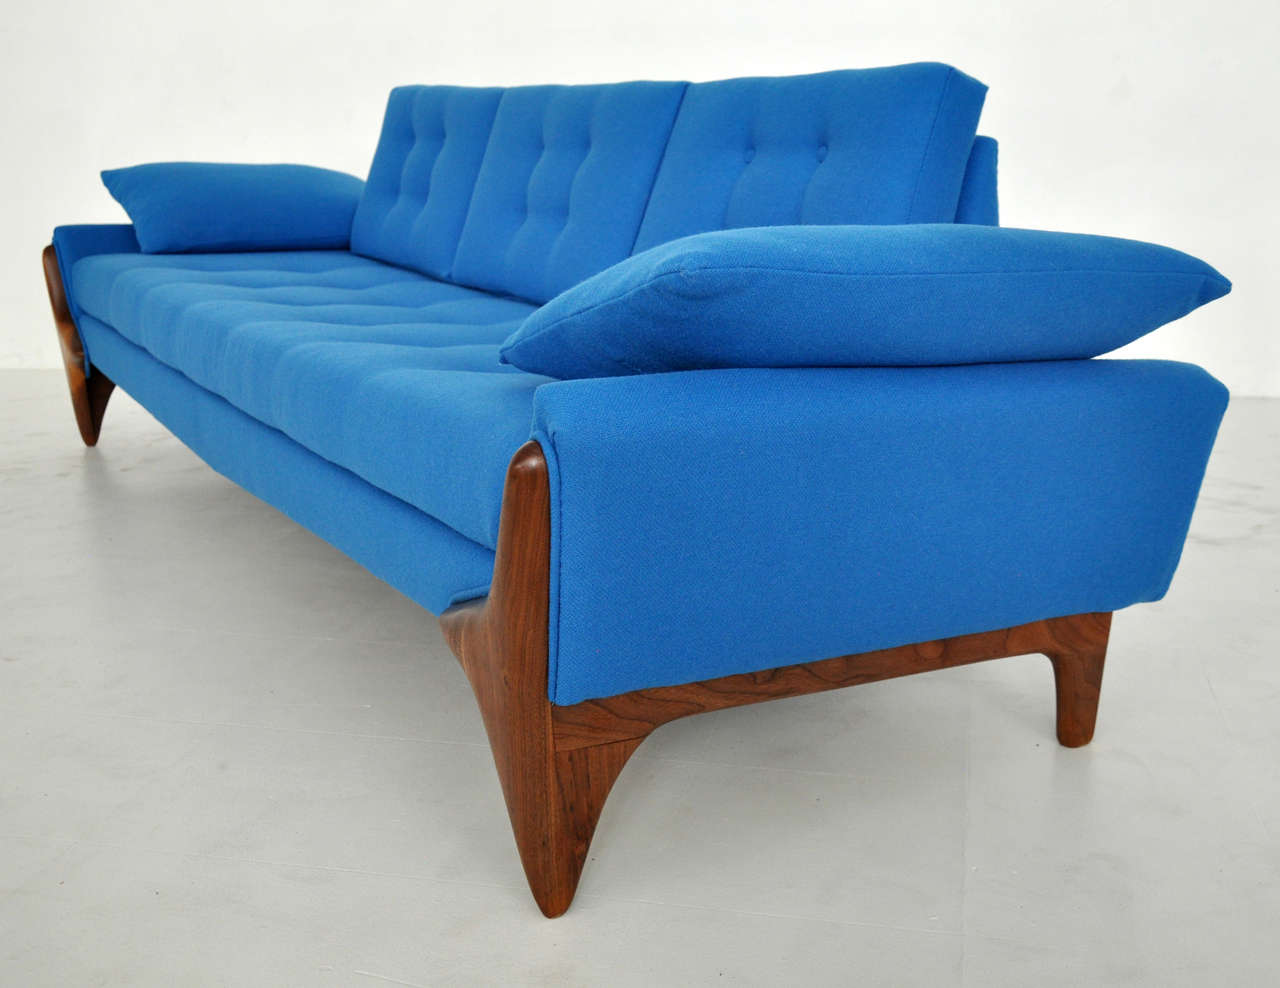 Sculptural Adrian Pearsall sofa.  Solid walnut bases with beautiful wood grain.  Newly upholstered in vibrant blue wool.